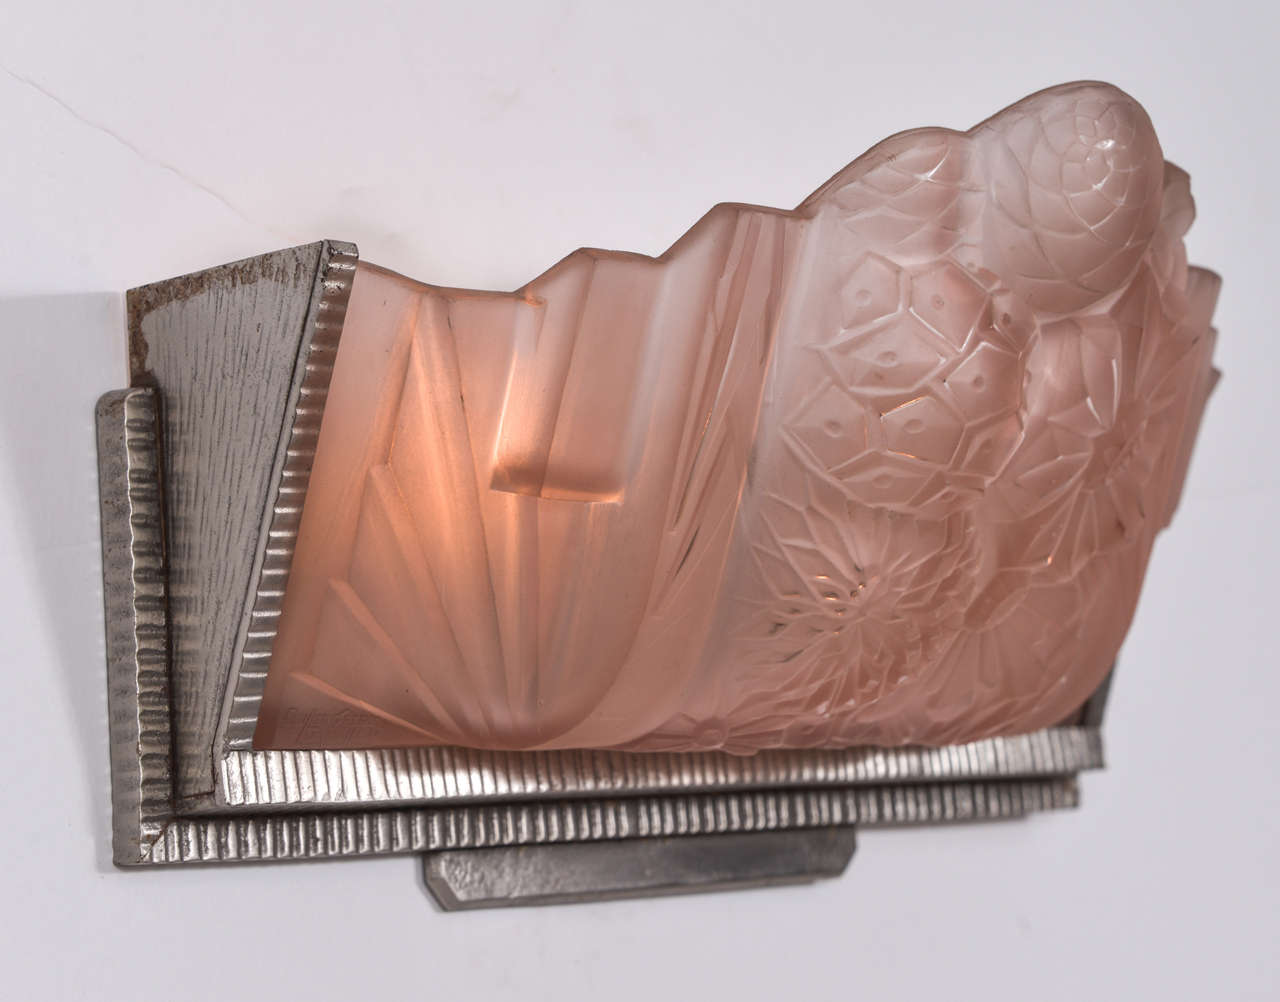 Signed French molded pink glass Art Deco wall sconce framed in brushed nickel over cast bronze. New US standard electrical wiring with two candelabra base sockets. Reduced from $3600 to $3000.